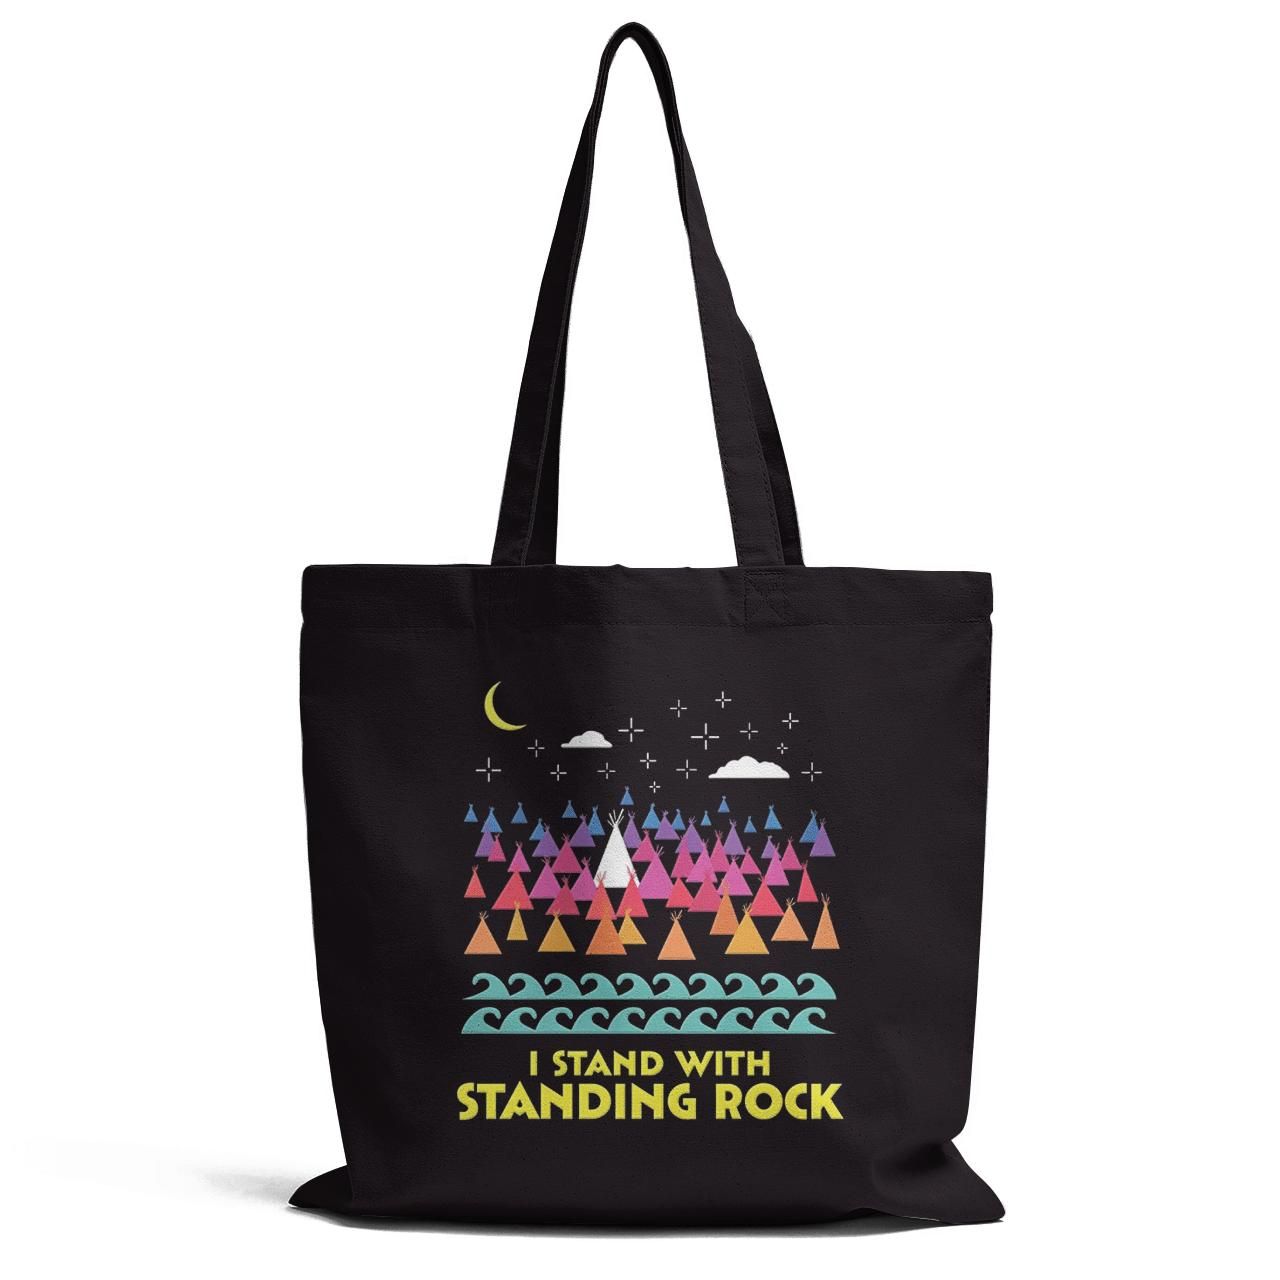 I Stand With Standing Rock Tote Bag